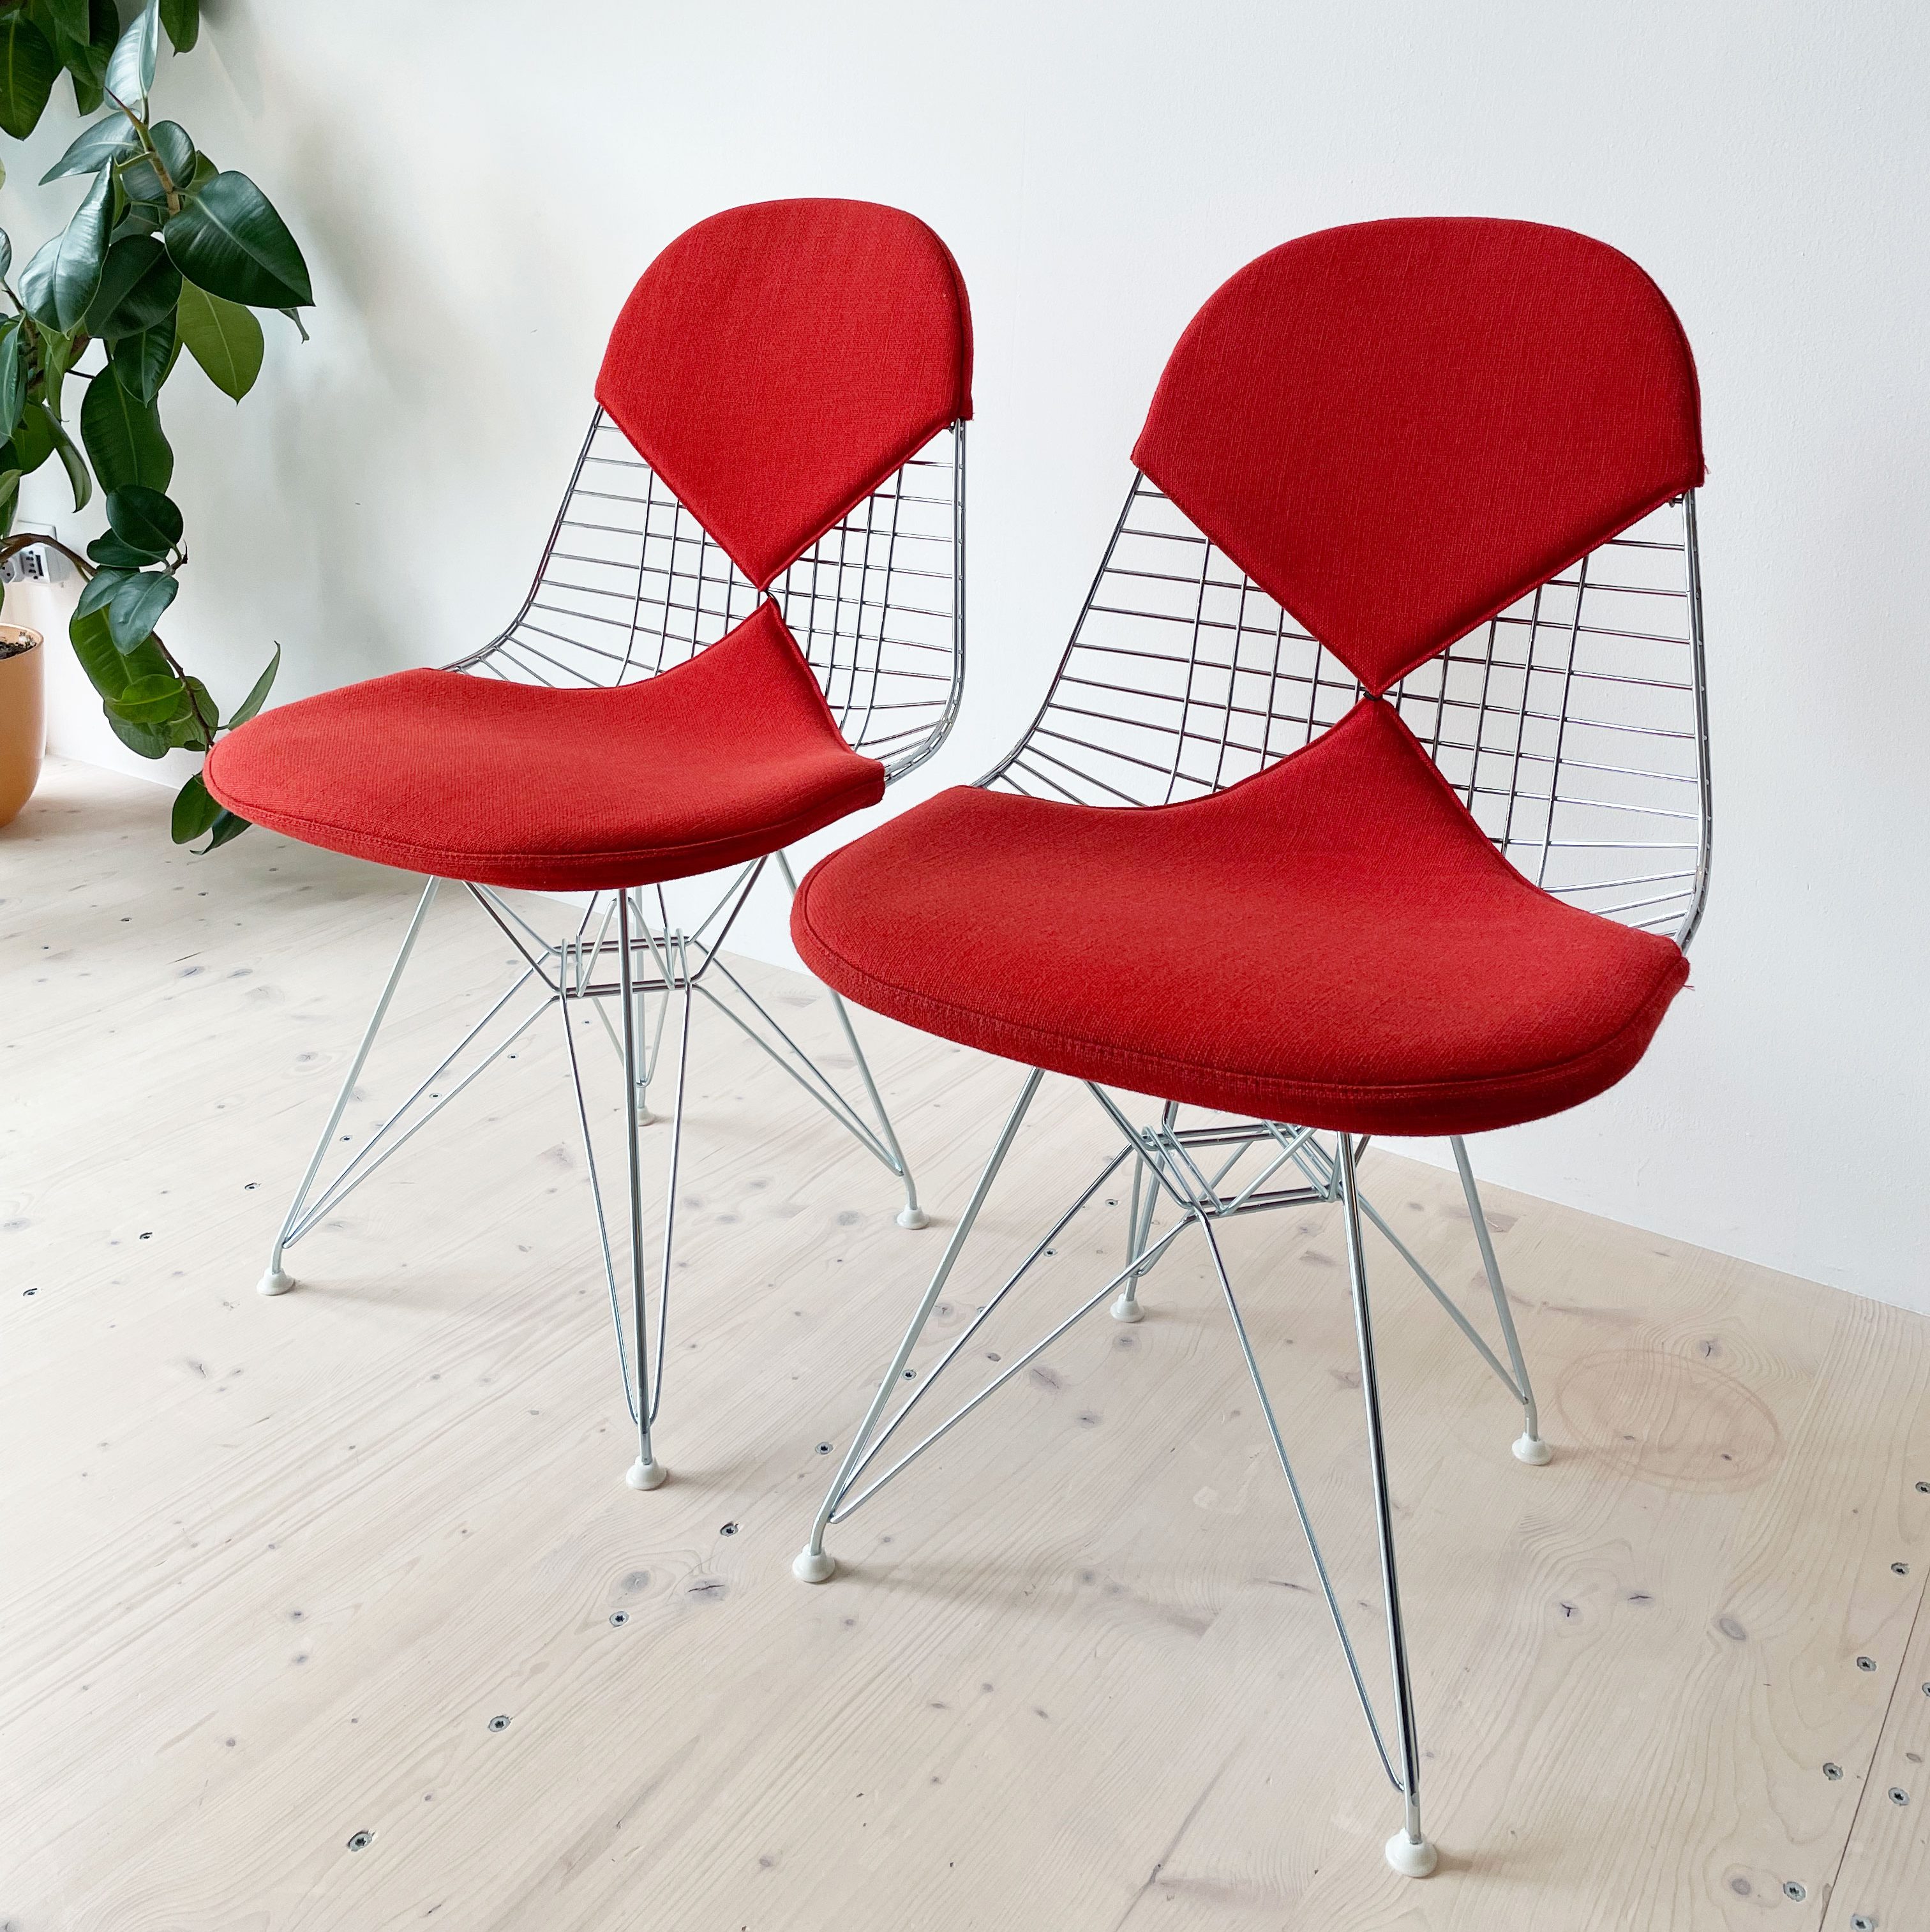 Red Bikini Eames Wire Chairs by Ray and Charles Eames. Produced by Herman Miller in the USA, 1960/70s. Available at heyday möbel, Grubenstrasse 19, 8045 Zürich, Switzerland.